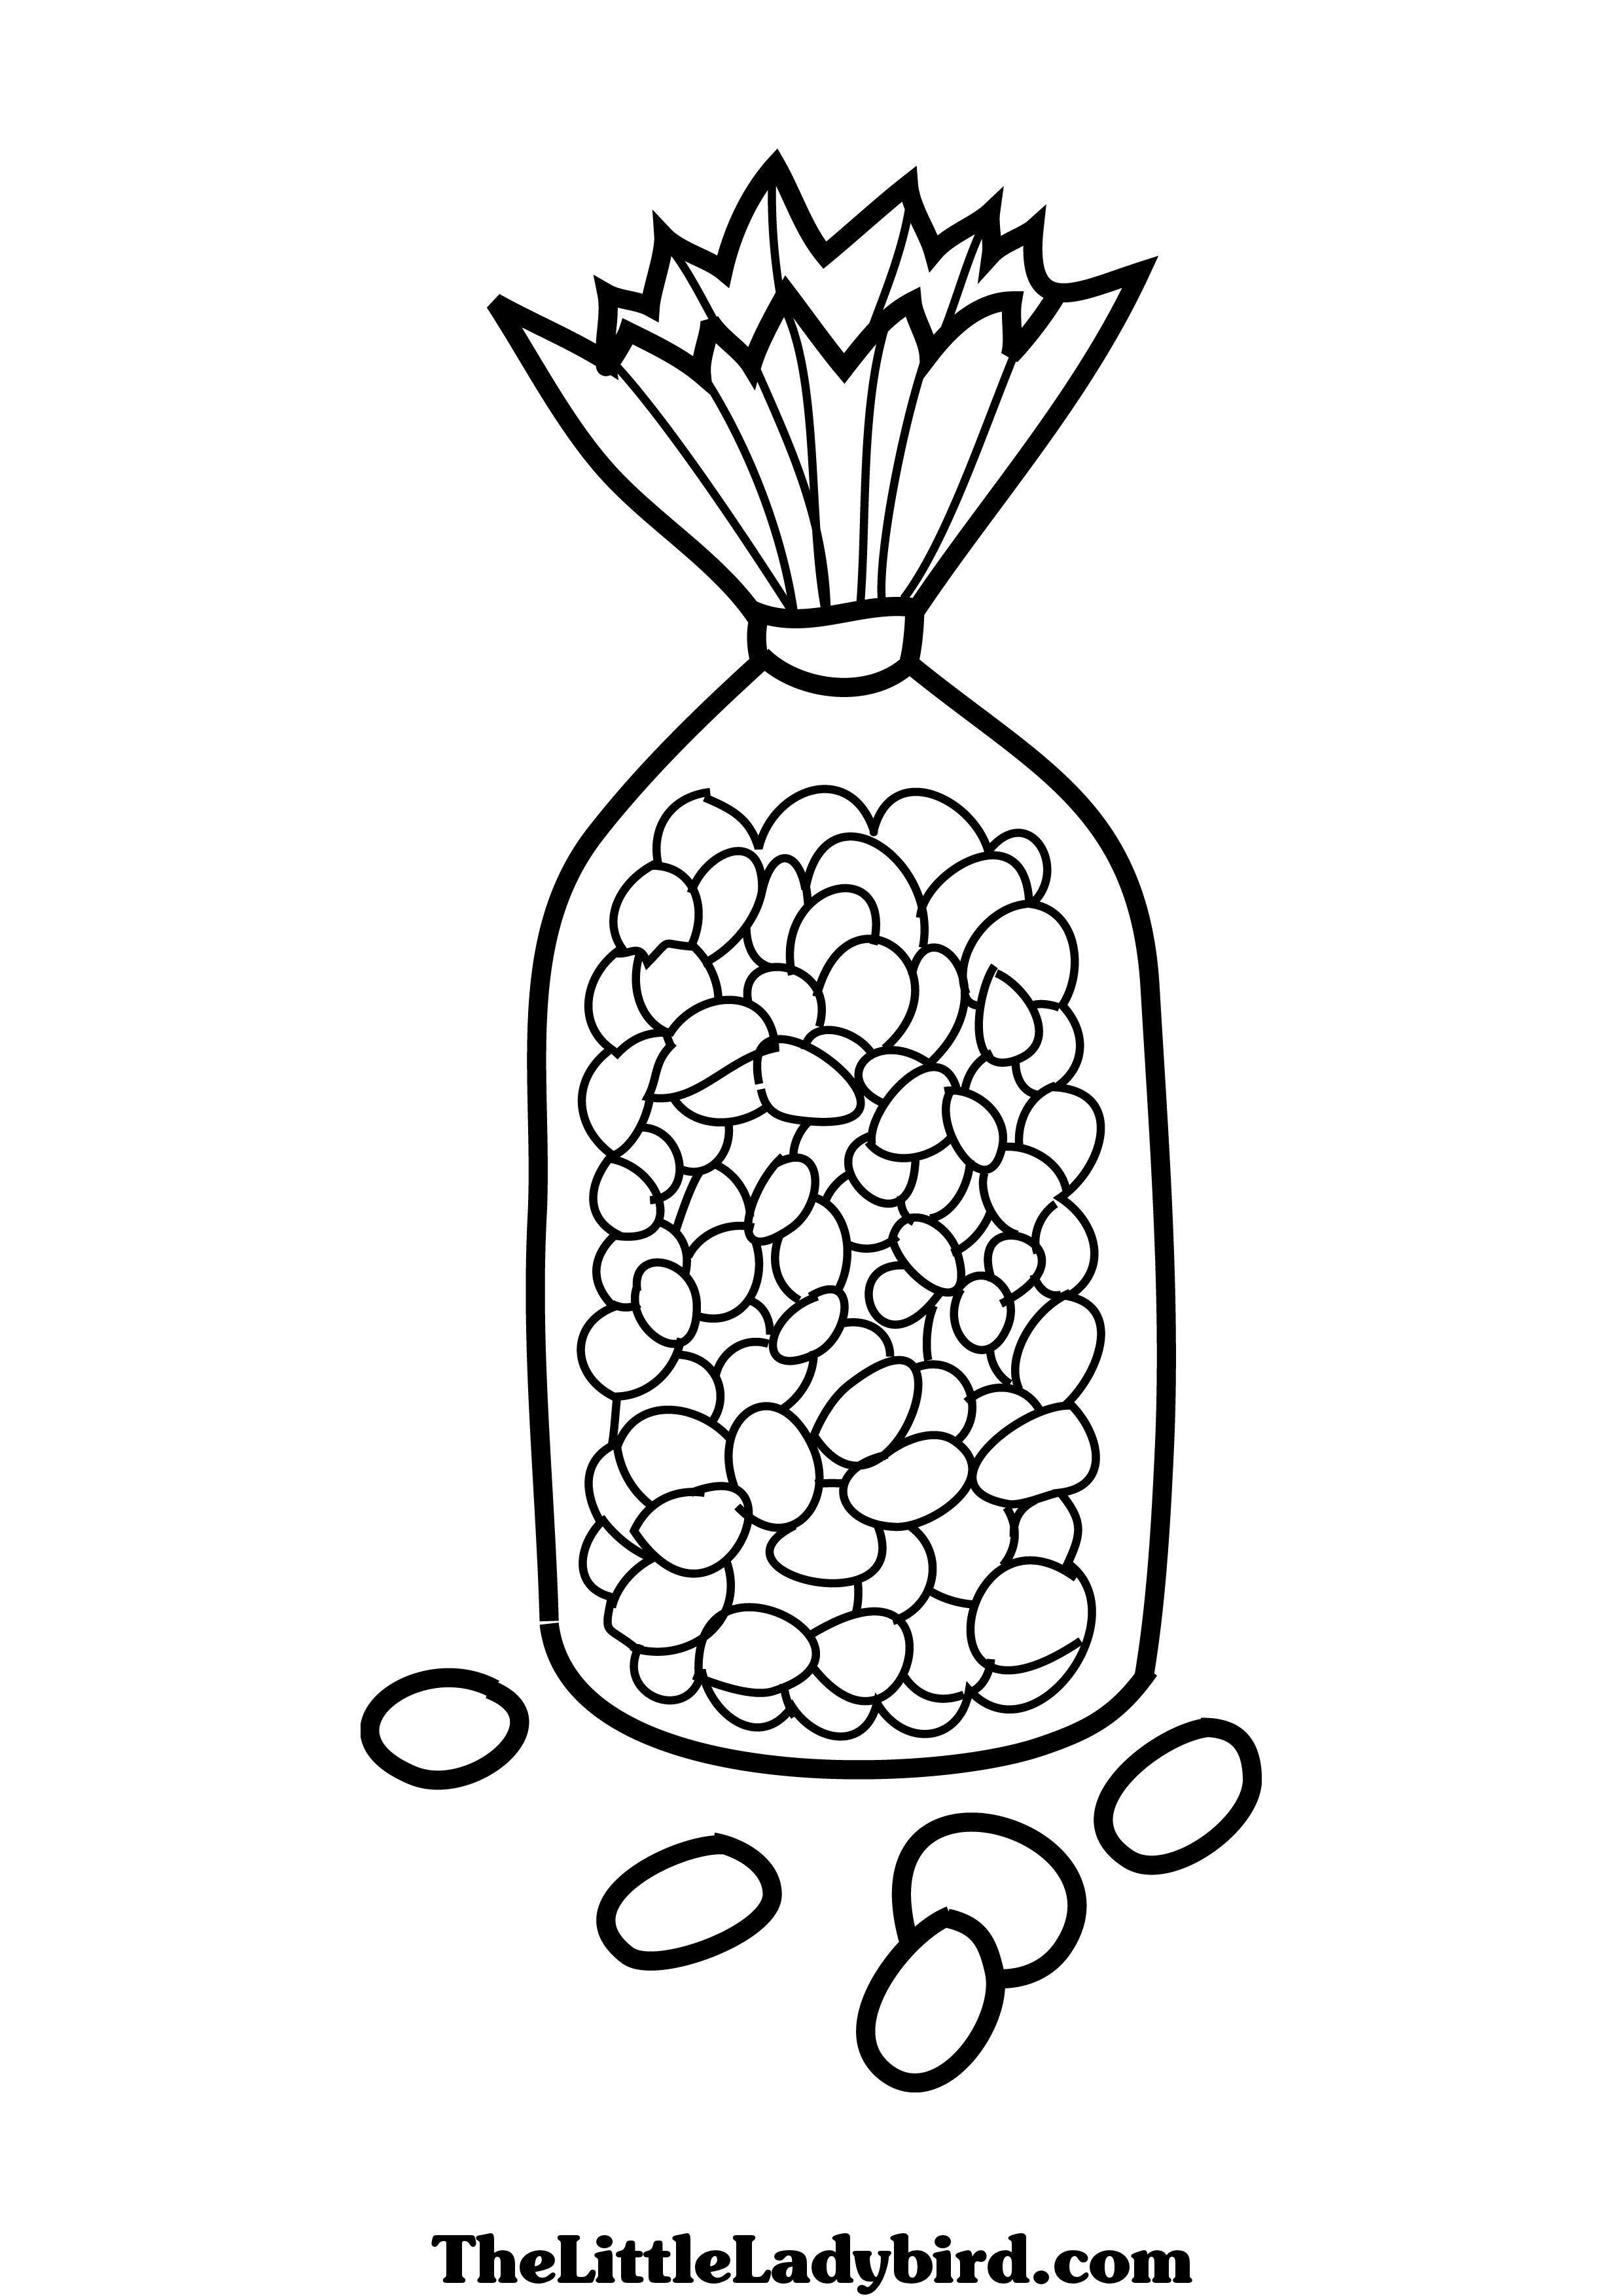 Jelly Bean Coloring Page at Free printable colorings